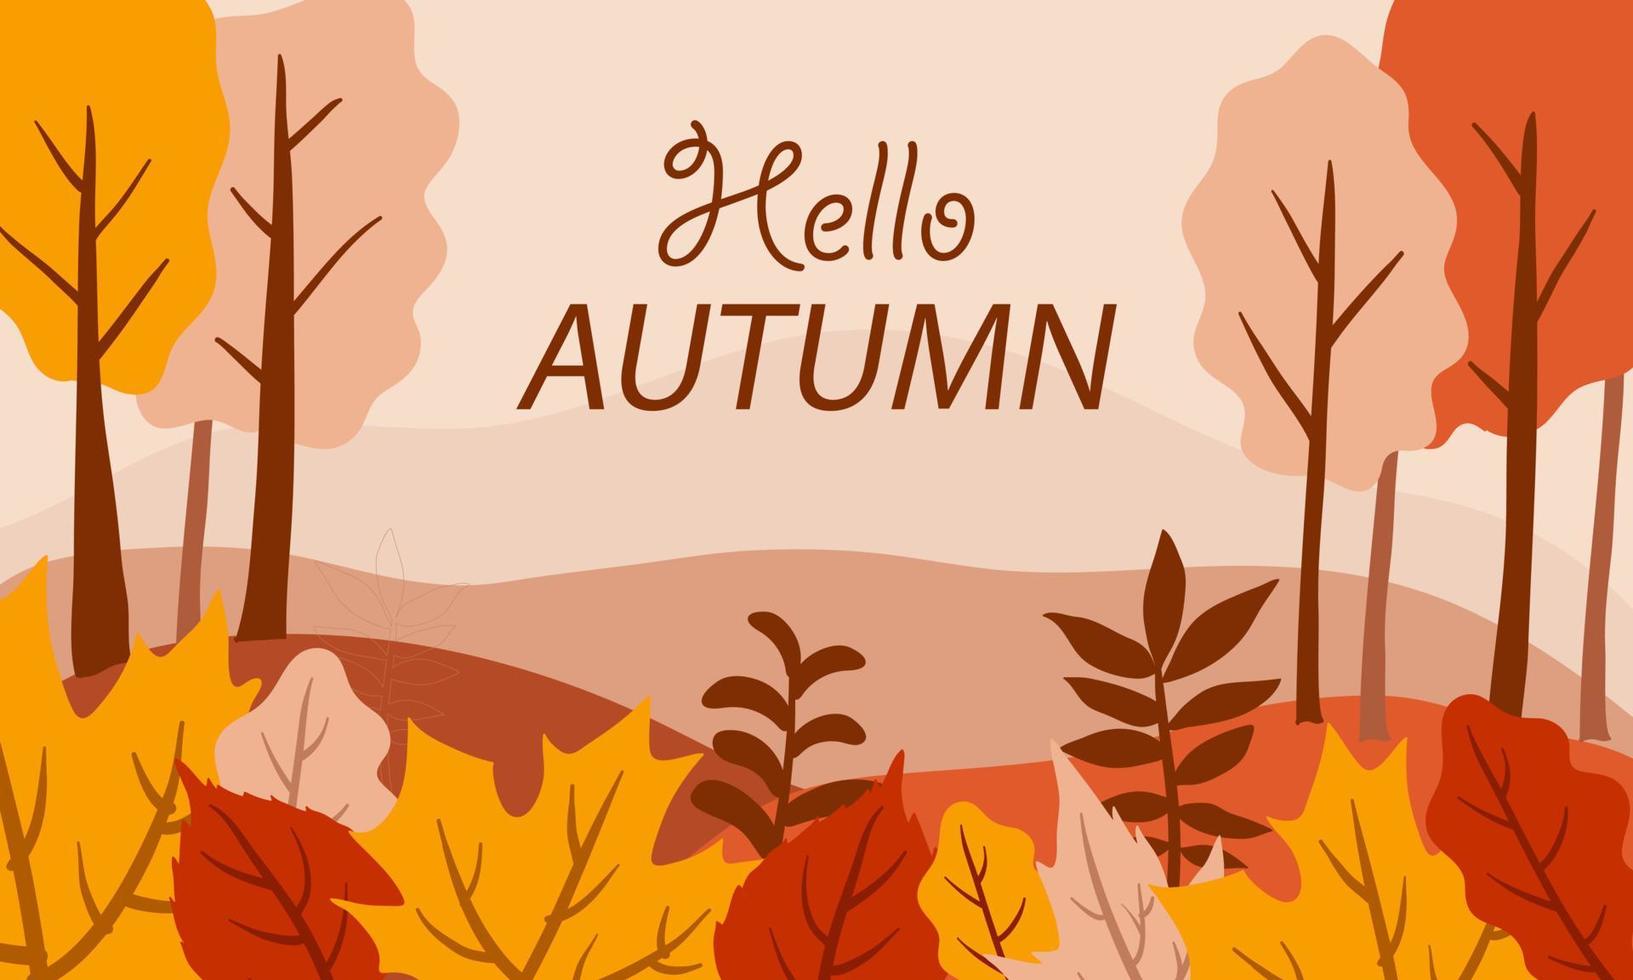 Hello Autumn Background, Autumn greetings Banner with landscape scene vector